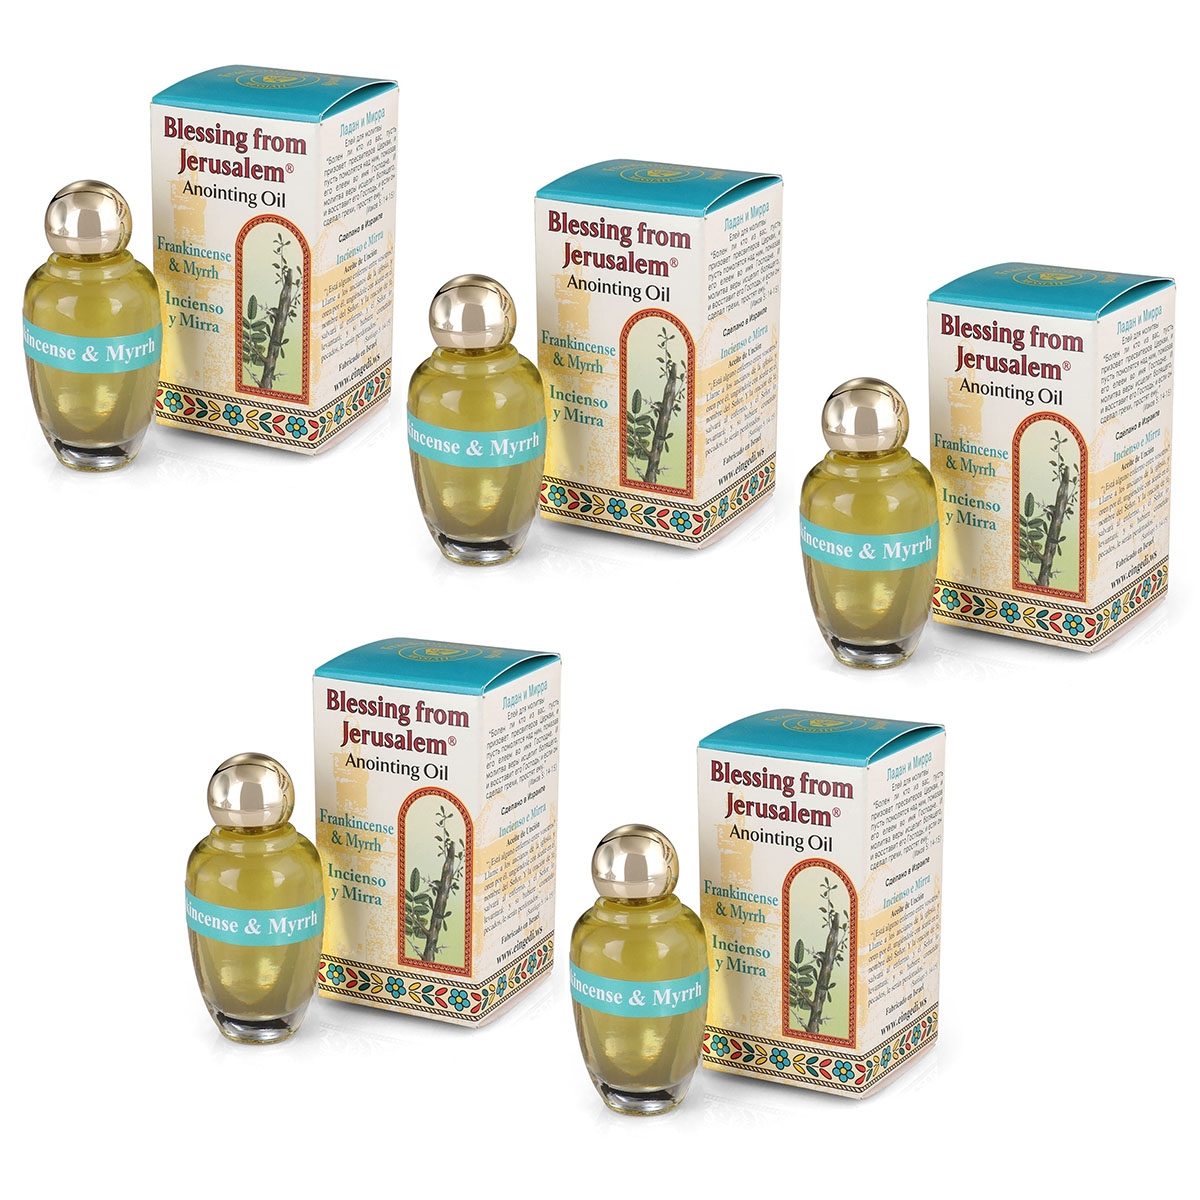 Ein Gedi Collection of Frankincense and Myrrh Anointing Oils (12 ml): Buy Four, Get The Fifth For Free! - 1